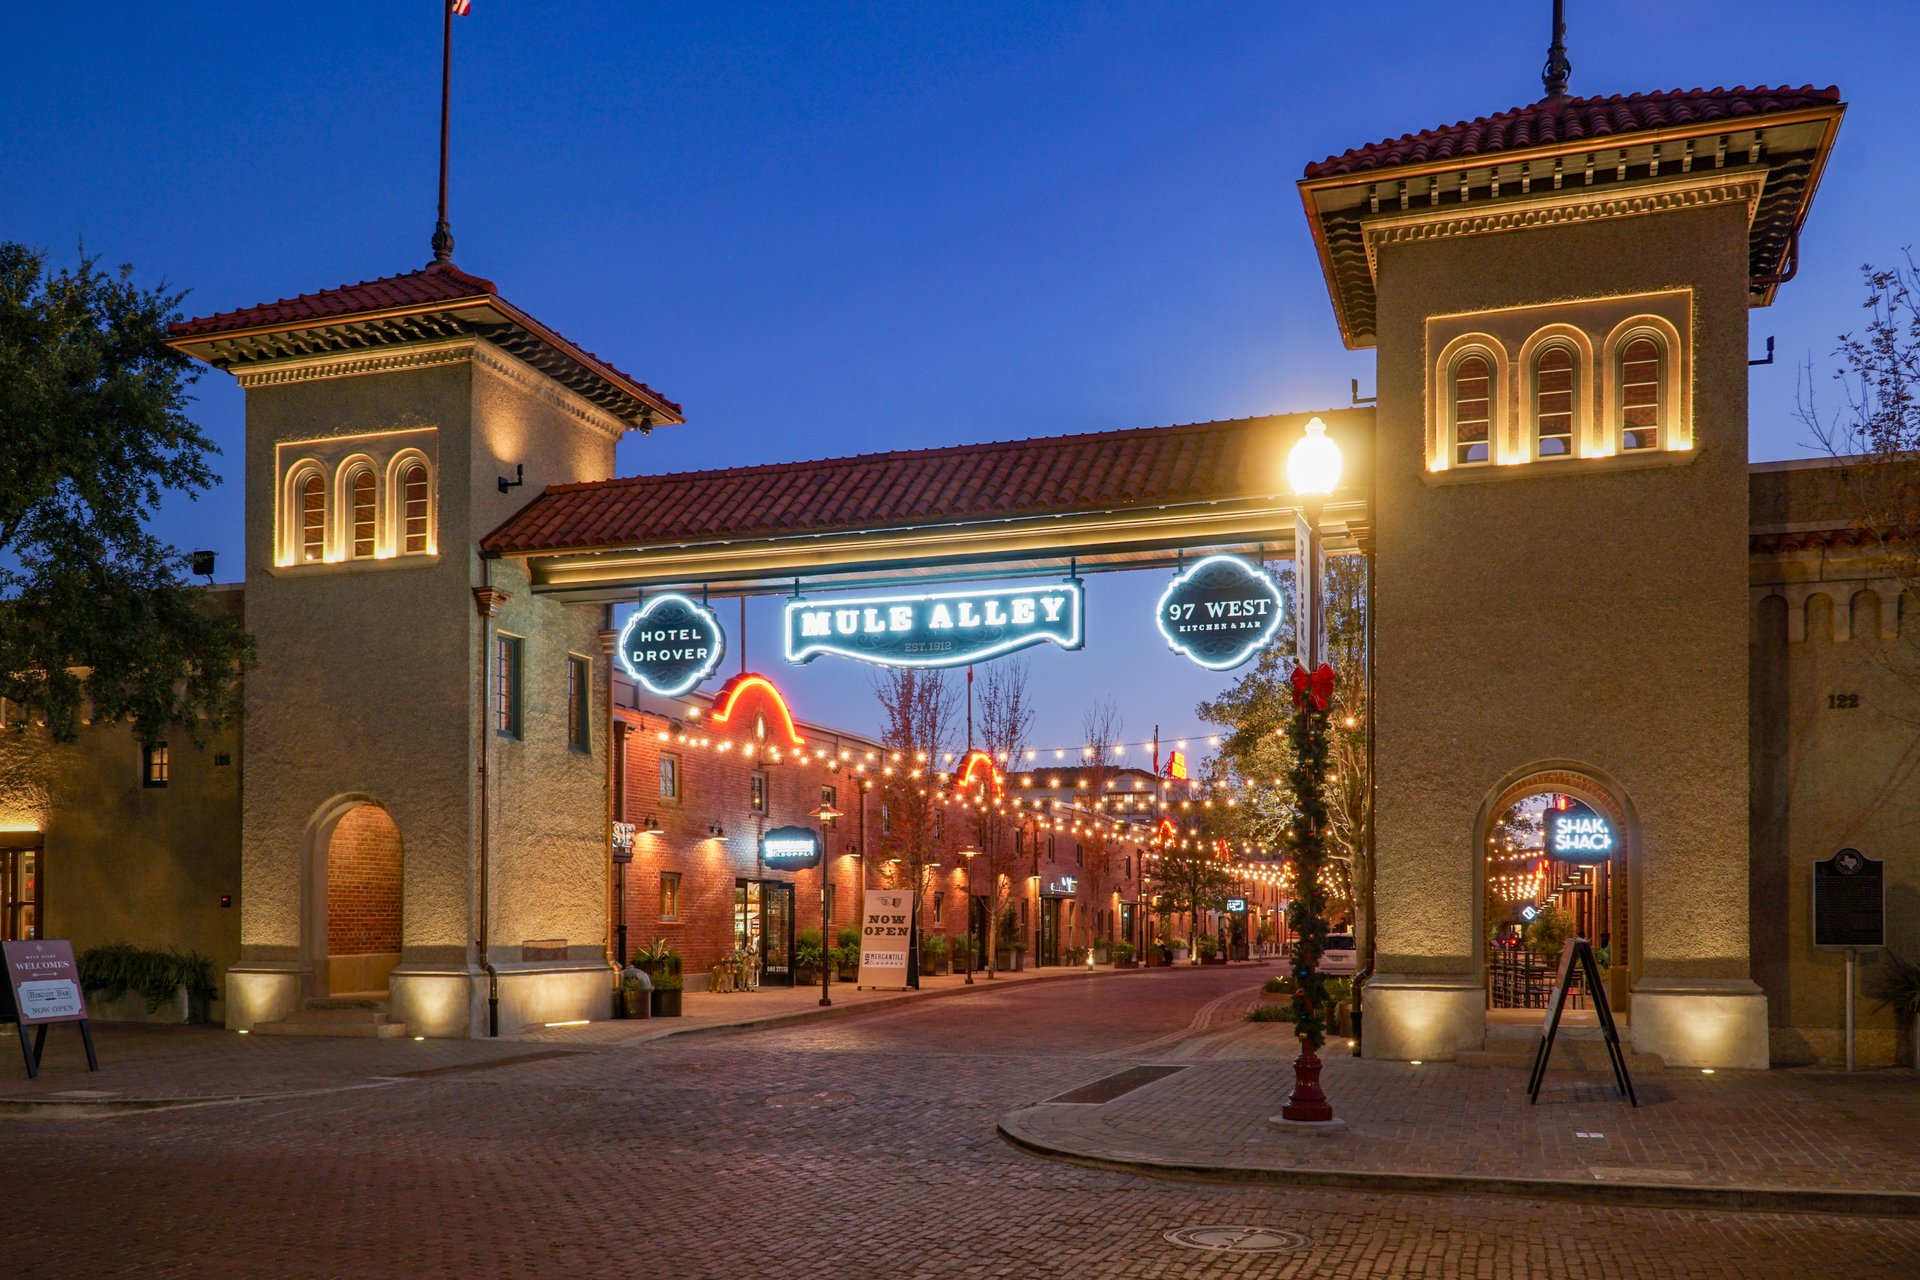 Cowtown Coliseum - Fort Worth, TX on Instagram: Looking for a date night  with your cowboy? Make the Fort Worth Stockyards your Thursday night out  destination! With our wide variety of restaurants